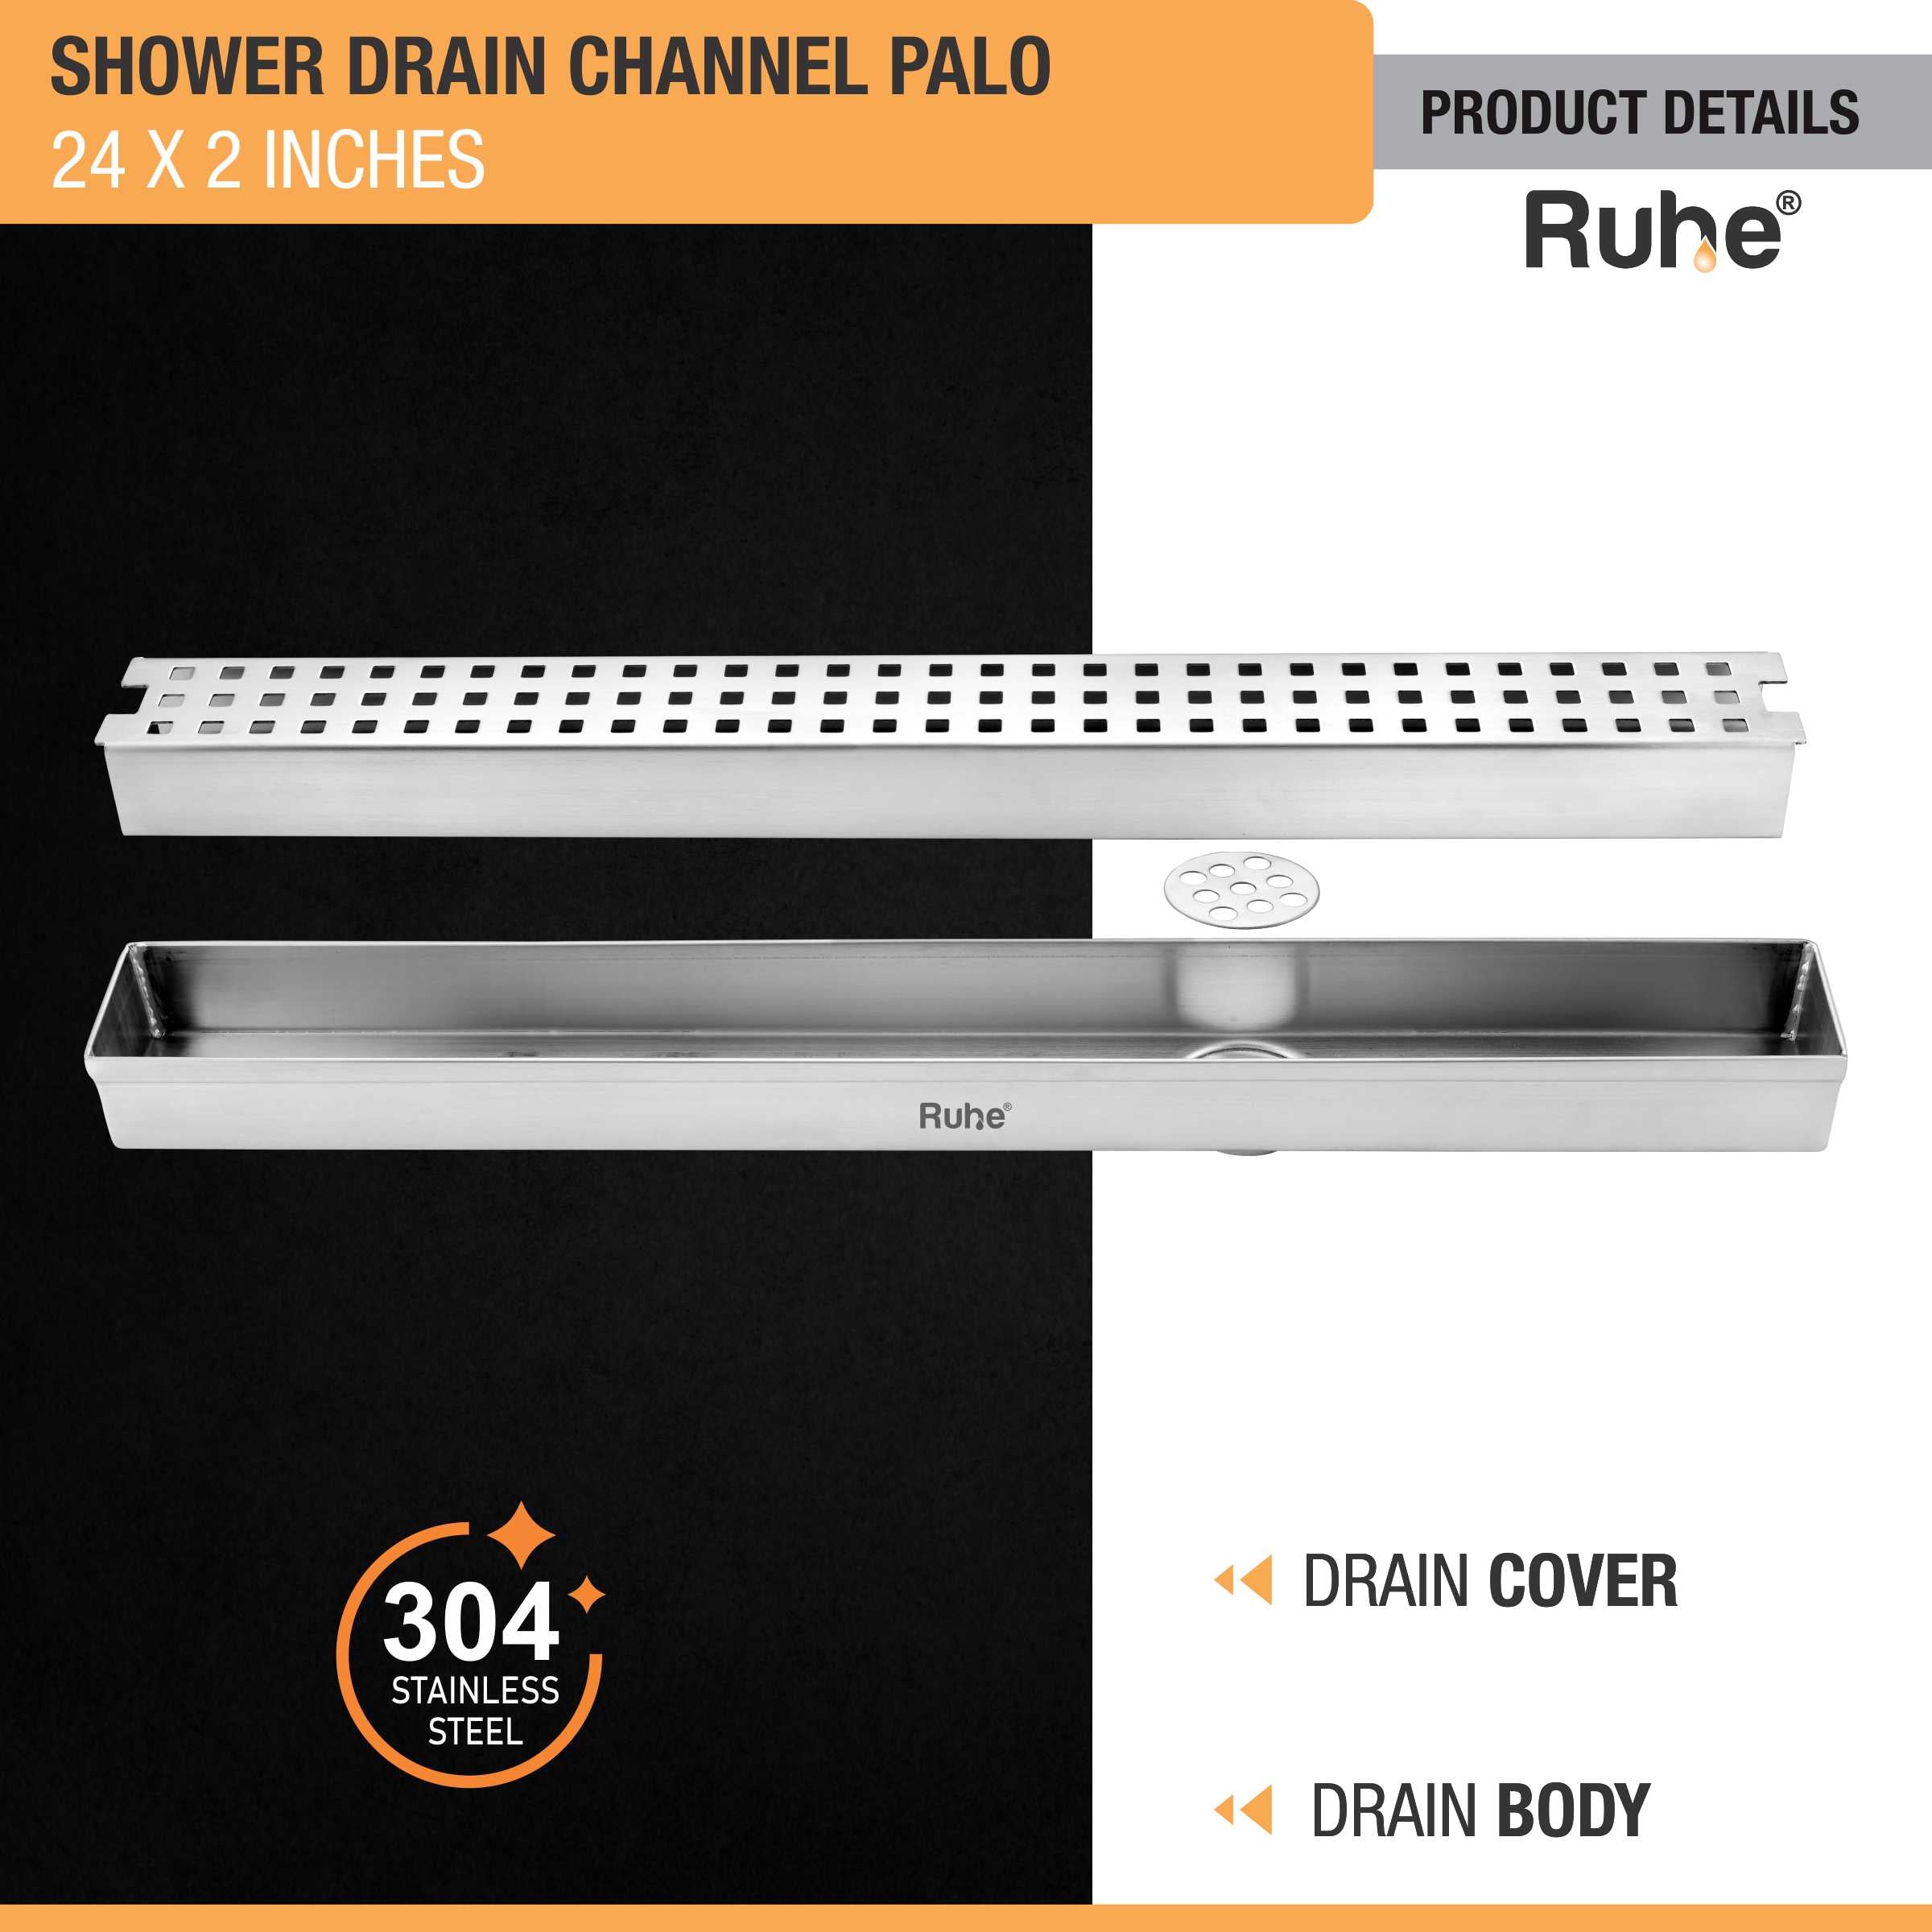 Palo Shower Drain Channel (24 X 2 Inches) (304 Grade) product details